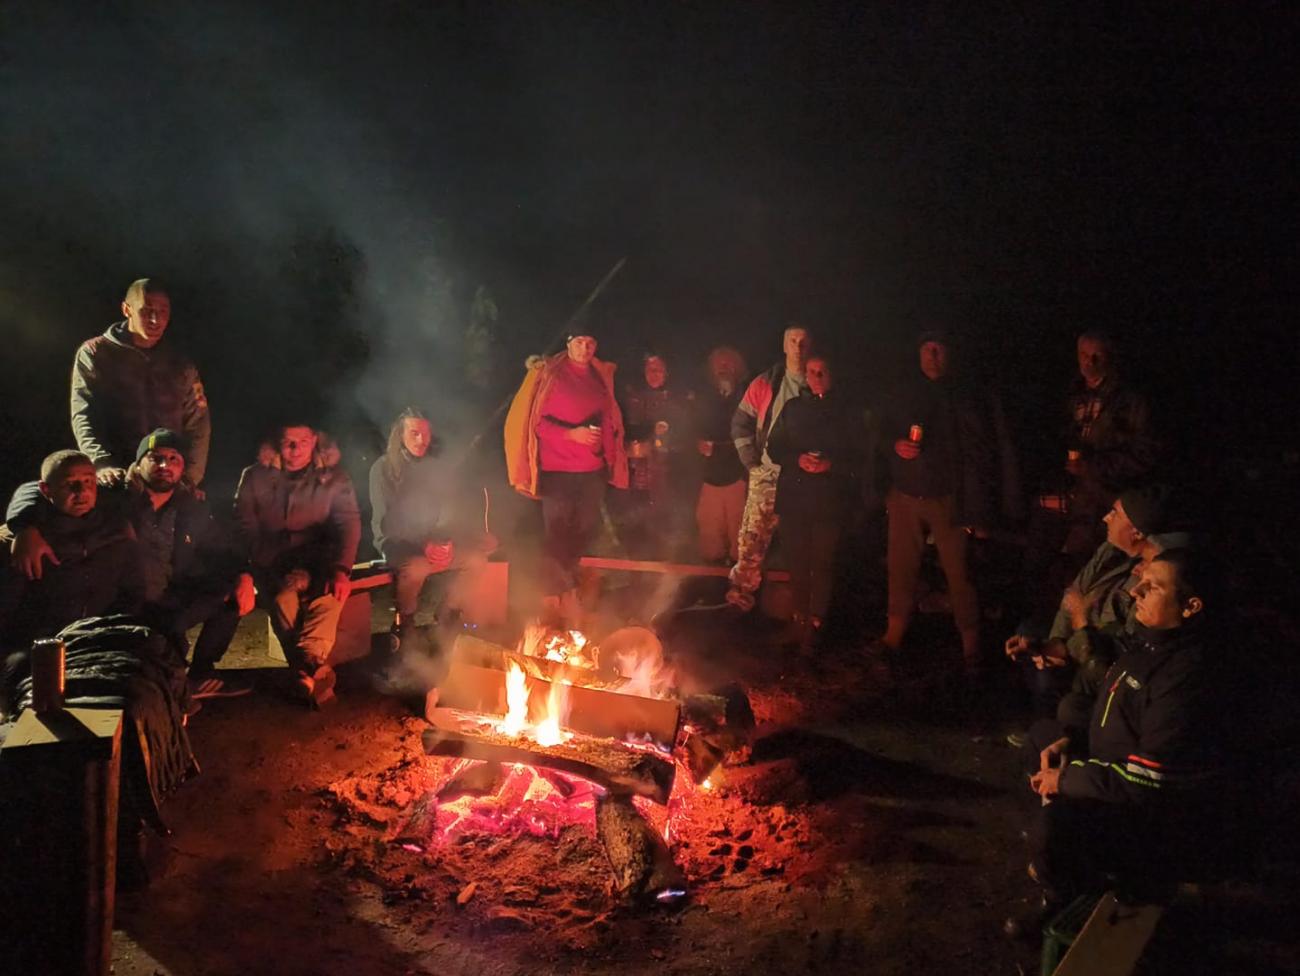 A large group of people sitting around a campfire at night